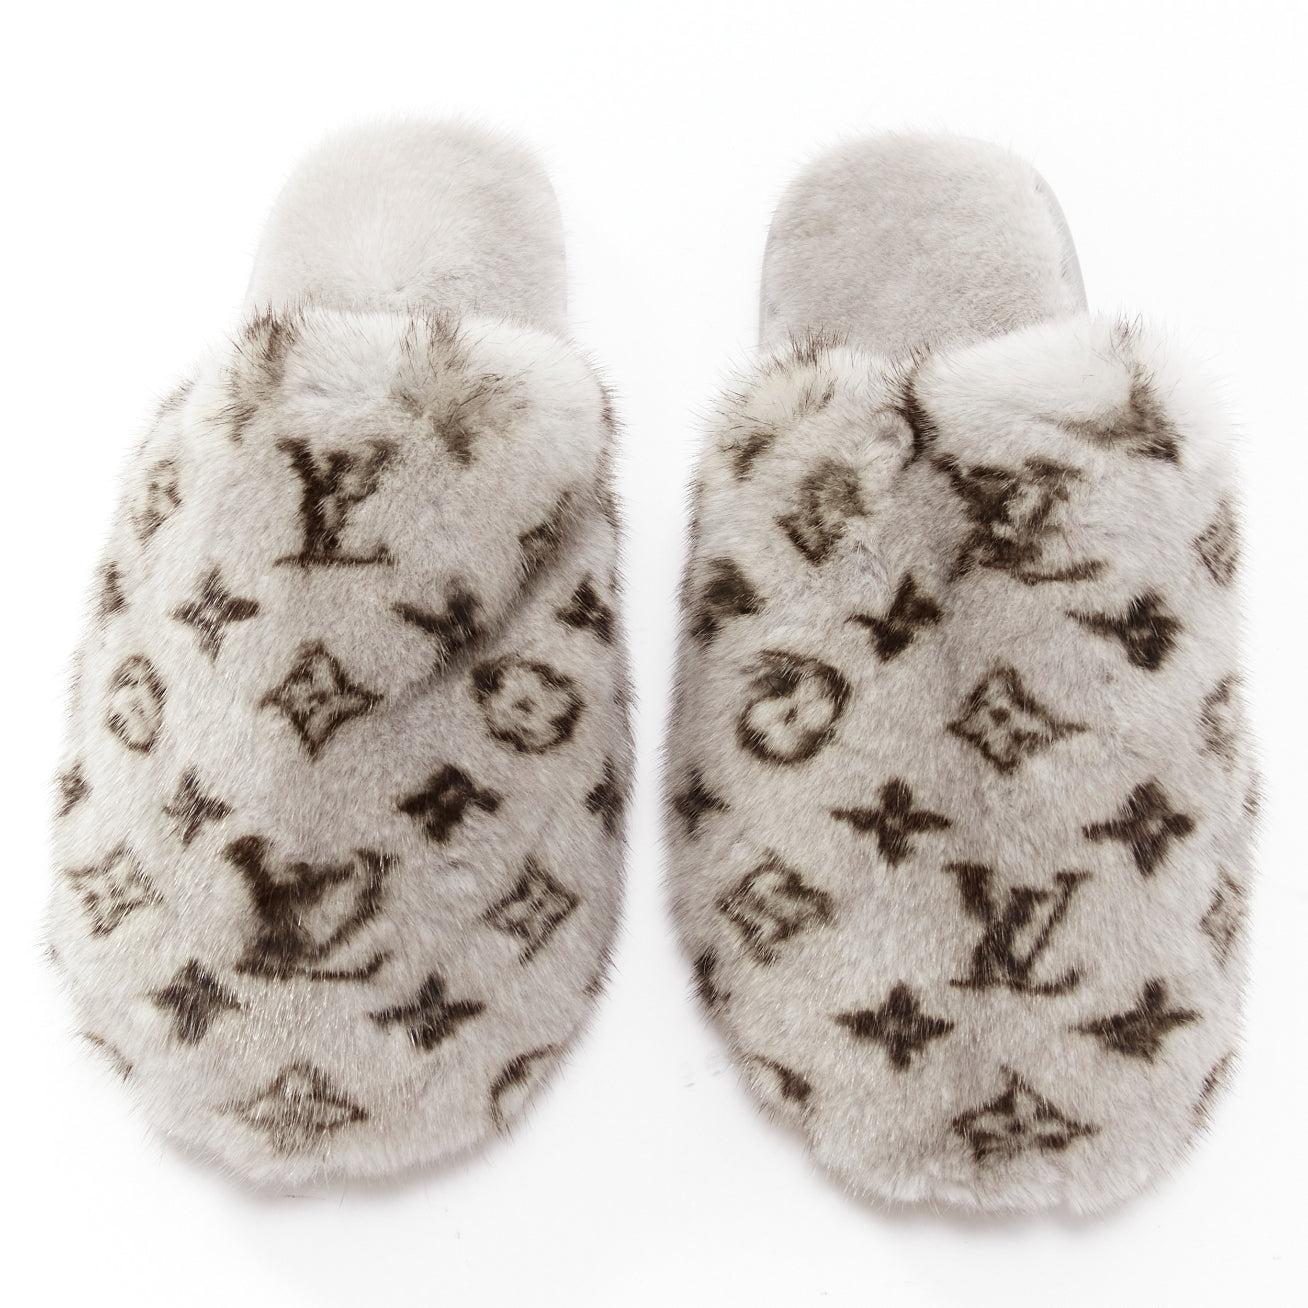 LOUIS VUITTON grey black monogram print mink fur flipper shoes EU37-38
Reference: TGAS/D01000
Brand: Louis Vuitton
Material: Fur
Color: Grey, Black
Pattern: Monogram
Extra Details: Full mink fur on outer and lining. Leather sole.
Made in: